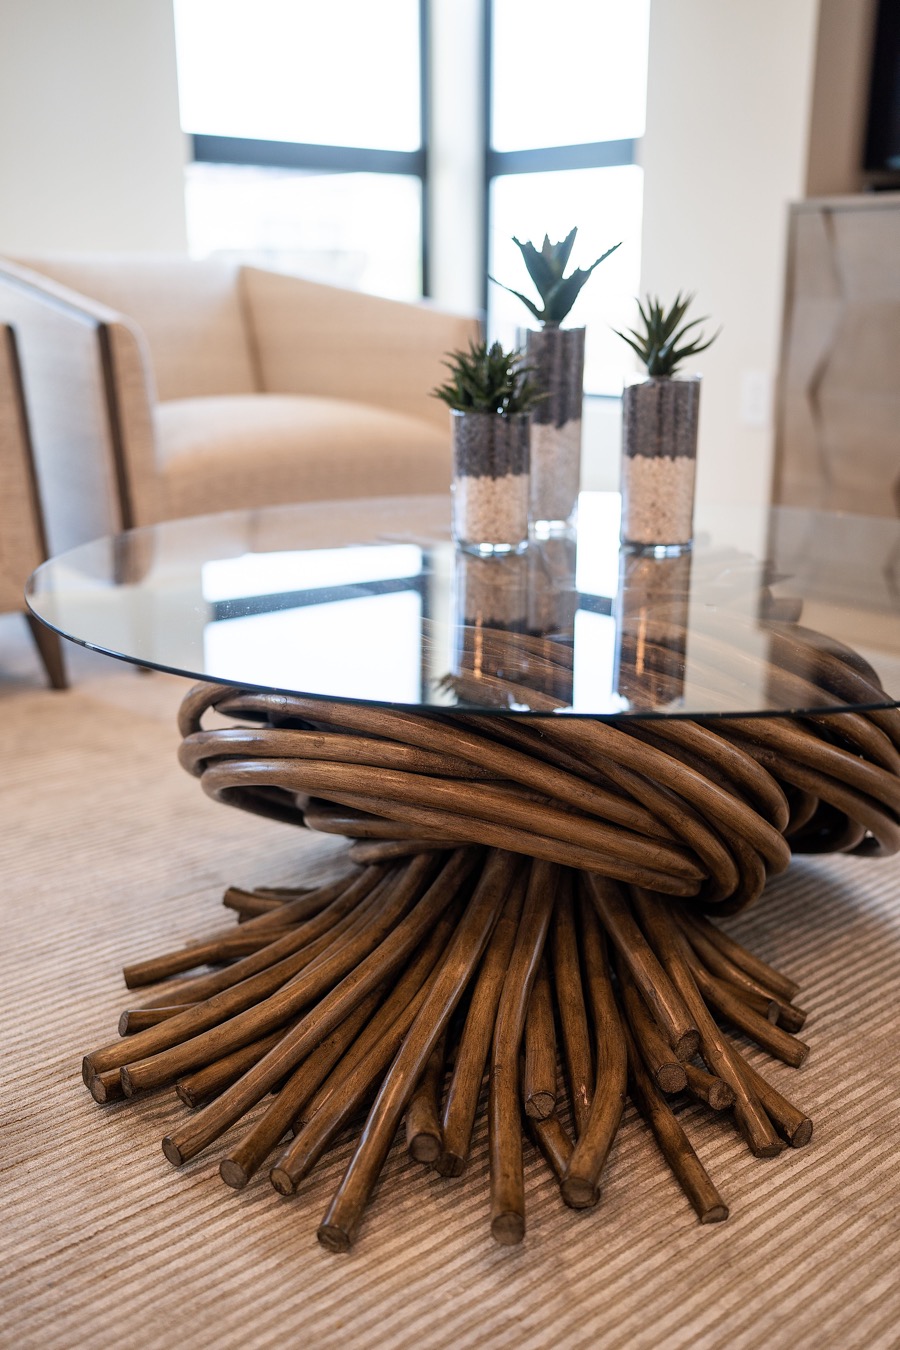 A table made of branches. Curved furniture fosters conversation and calming connections in biophilic designs.